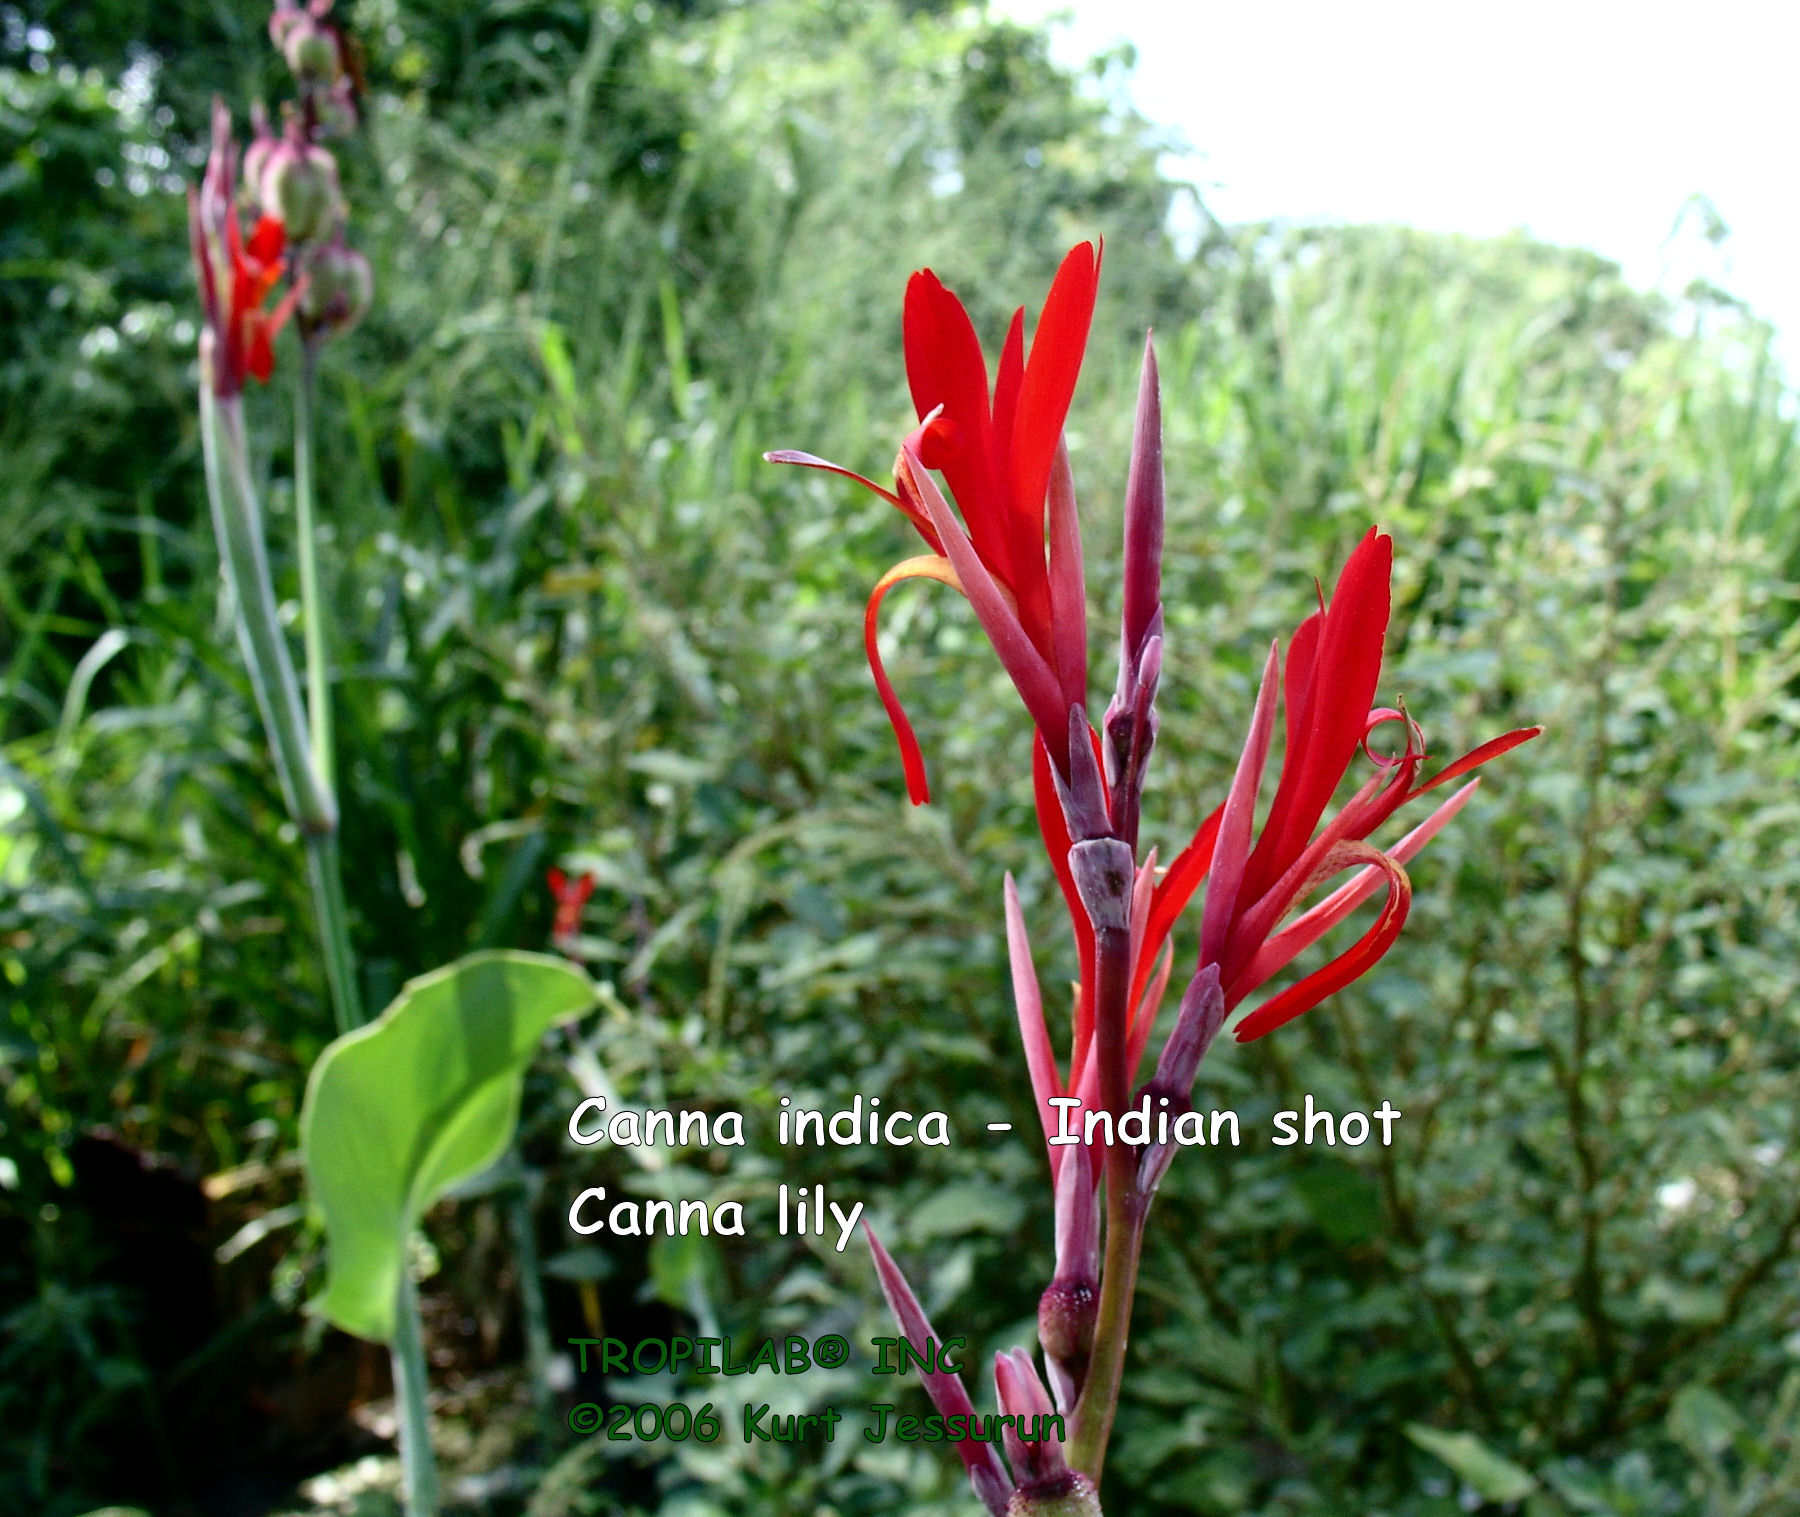  Red Canna indica - Indian shot